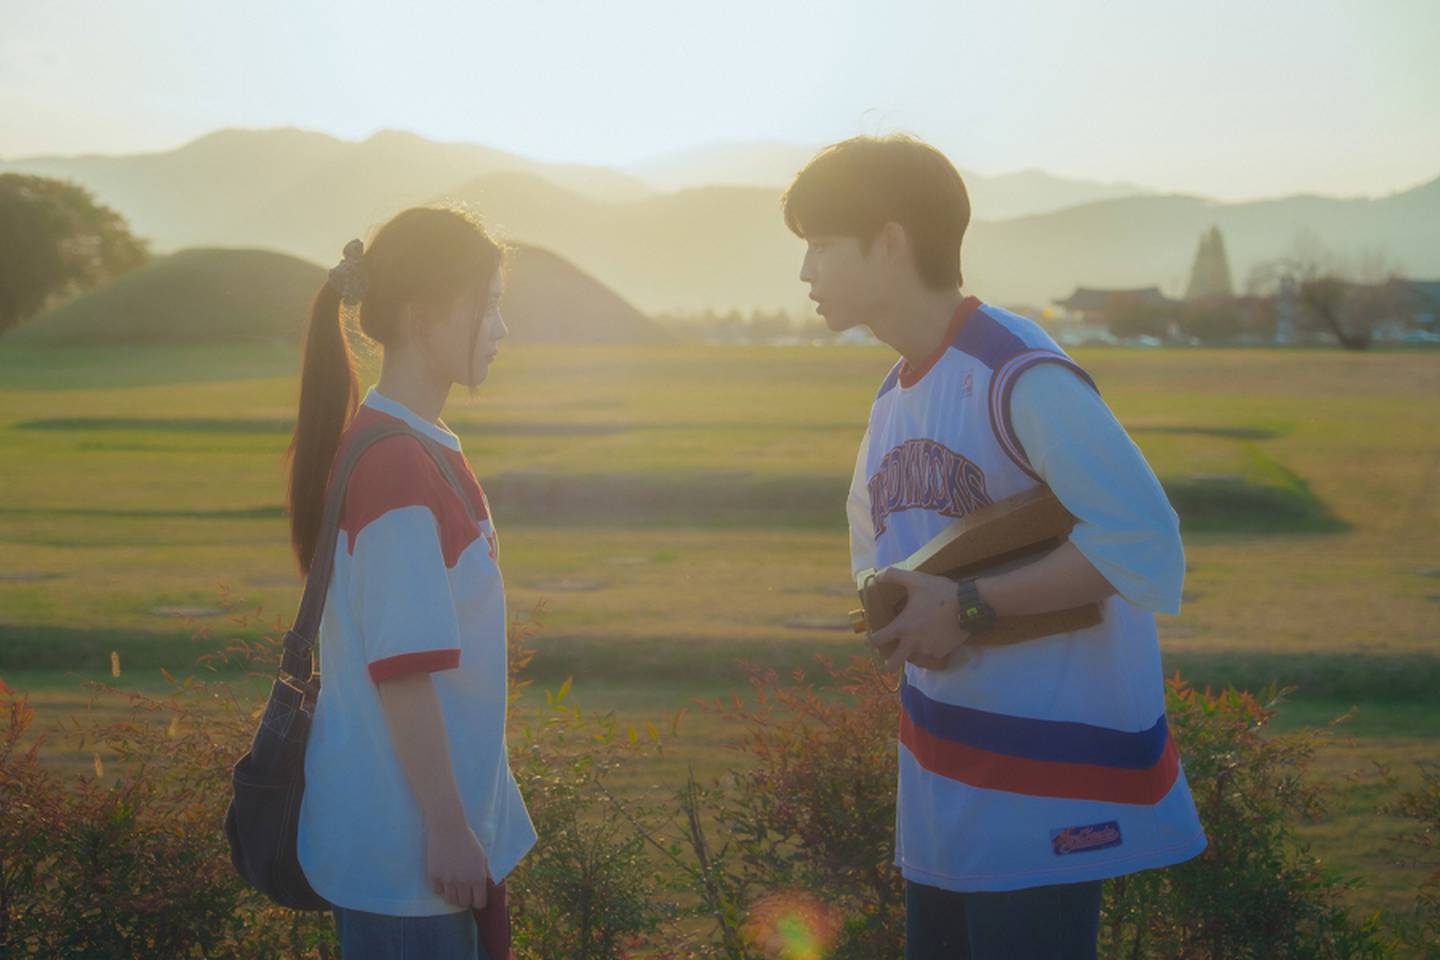 Scenes from '20th century girl'